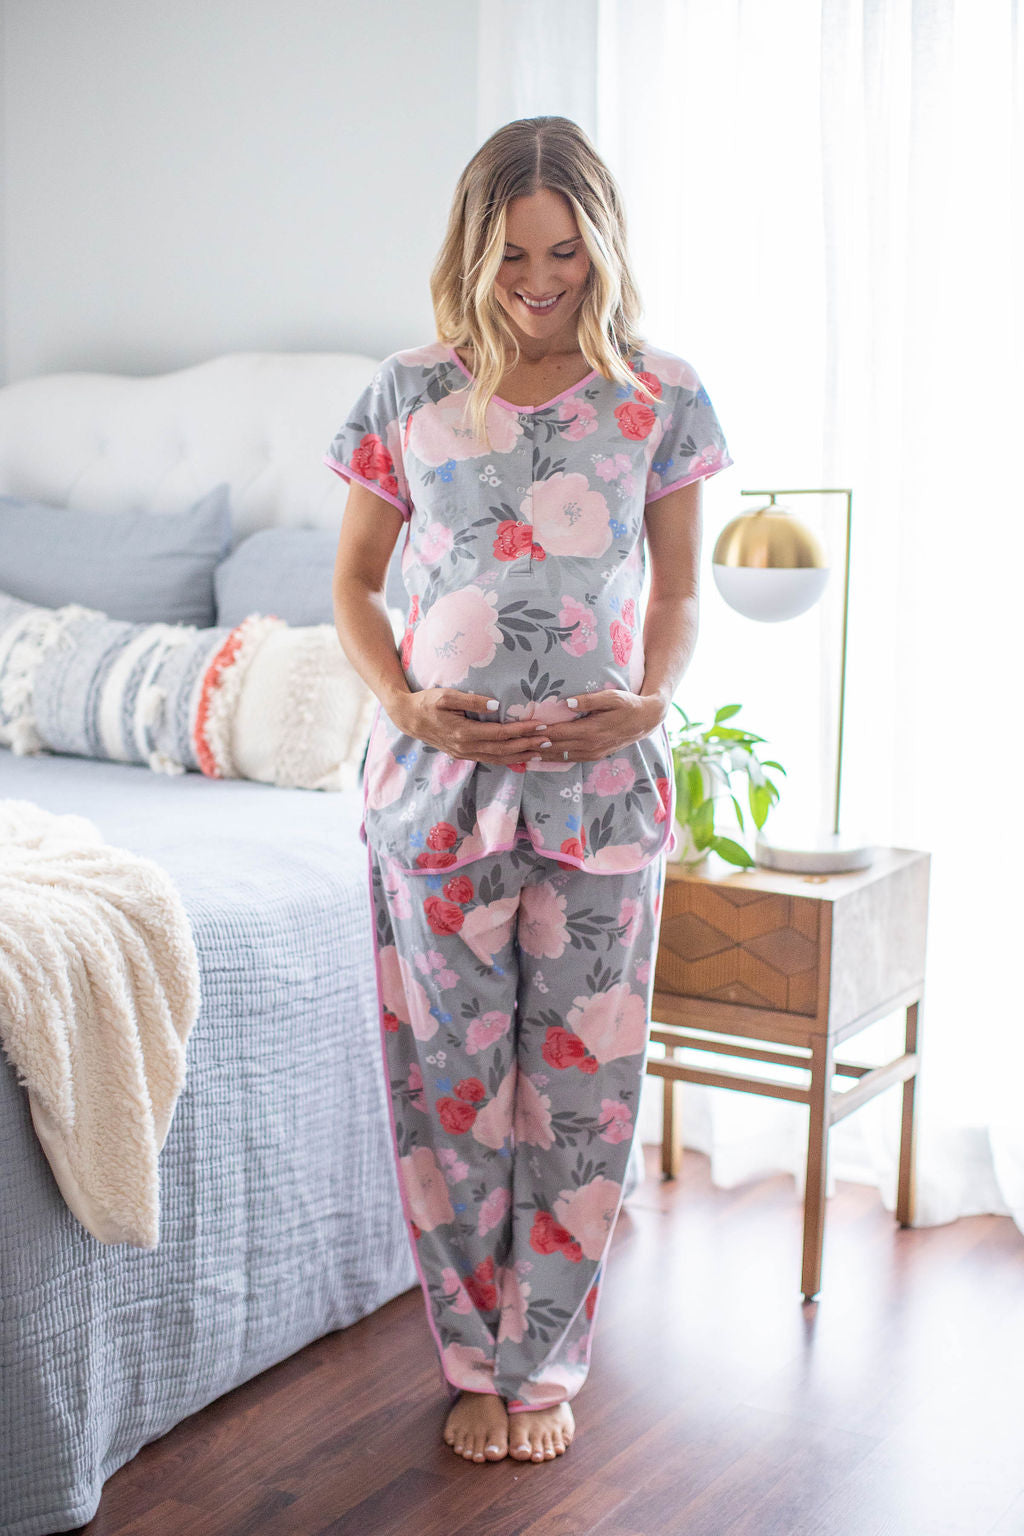 Sophie print with pint and red flowers against a grey background. Pink trim along dolphin hem. Maternity pajamas for mom with easy front snaps for breastfeeding baby. Perfect for pre and post pregnancy.